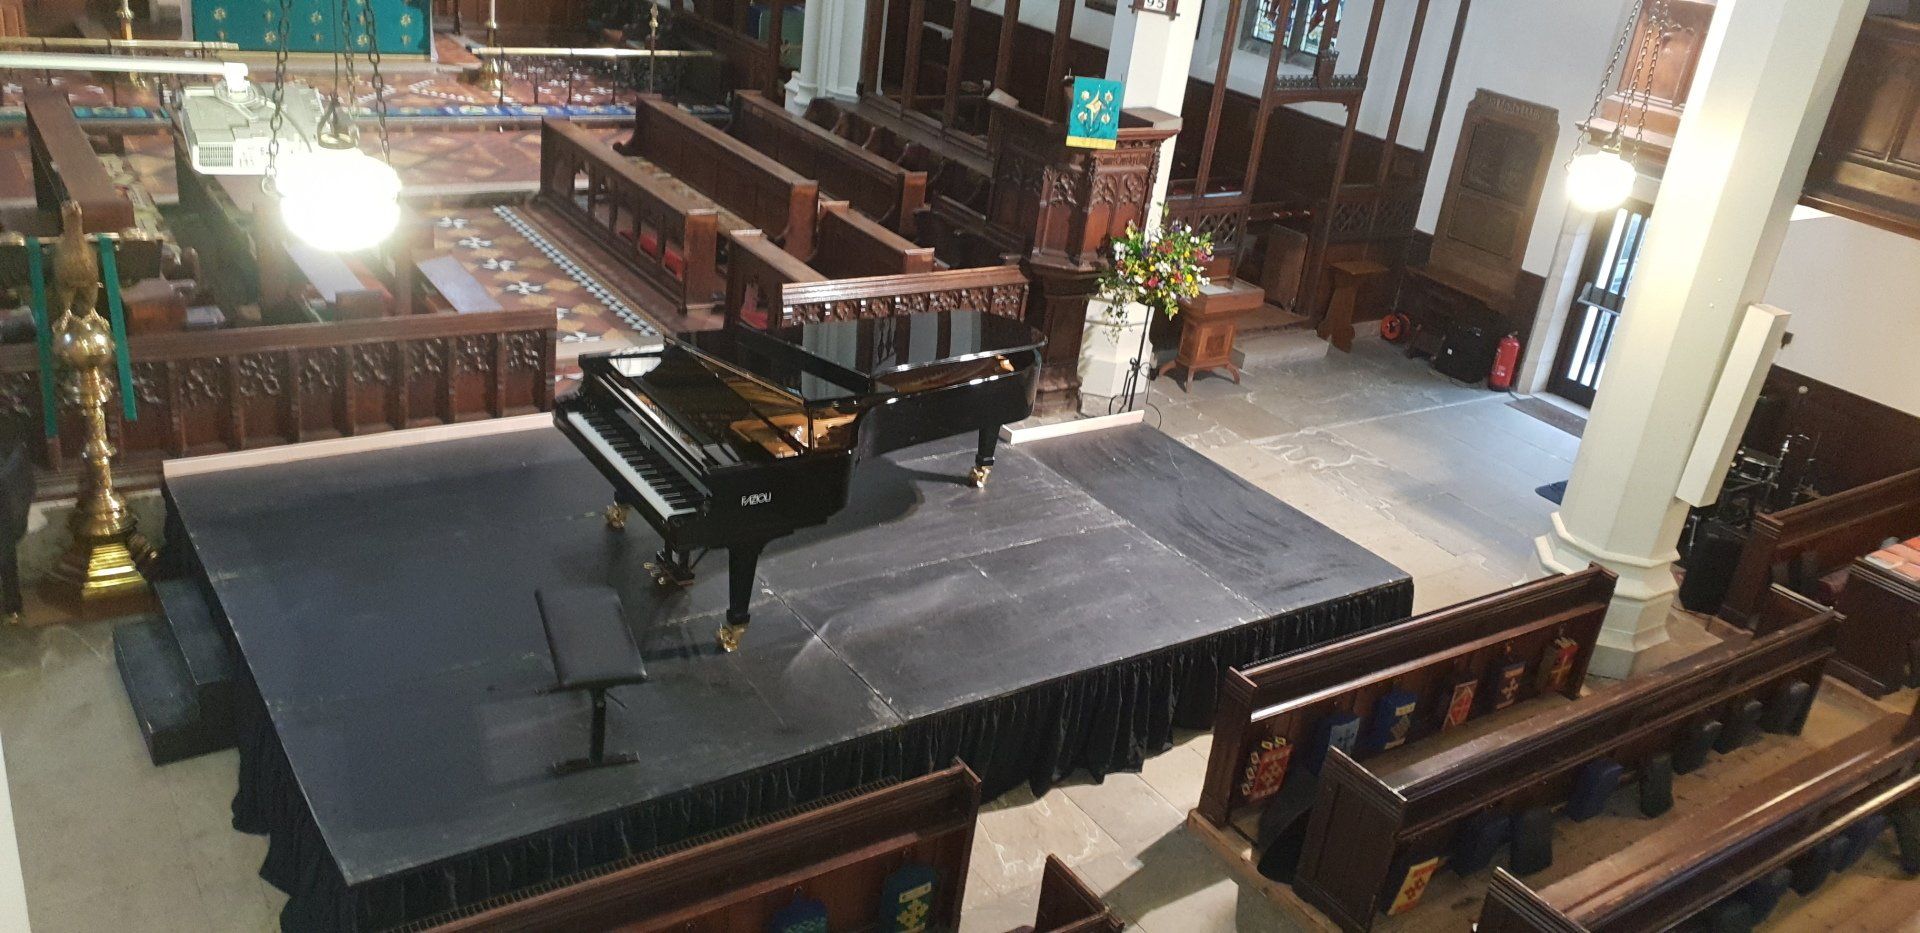 Ariel shot of an indoor modular staging set up in a church with a piano on it.